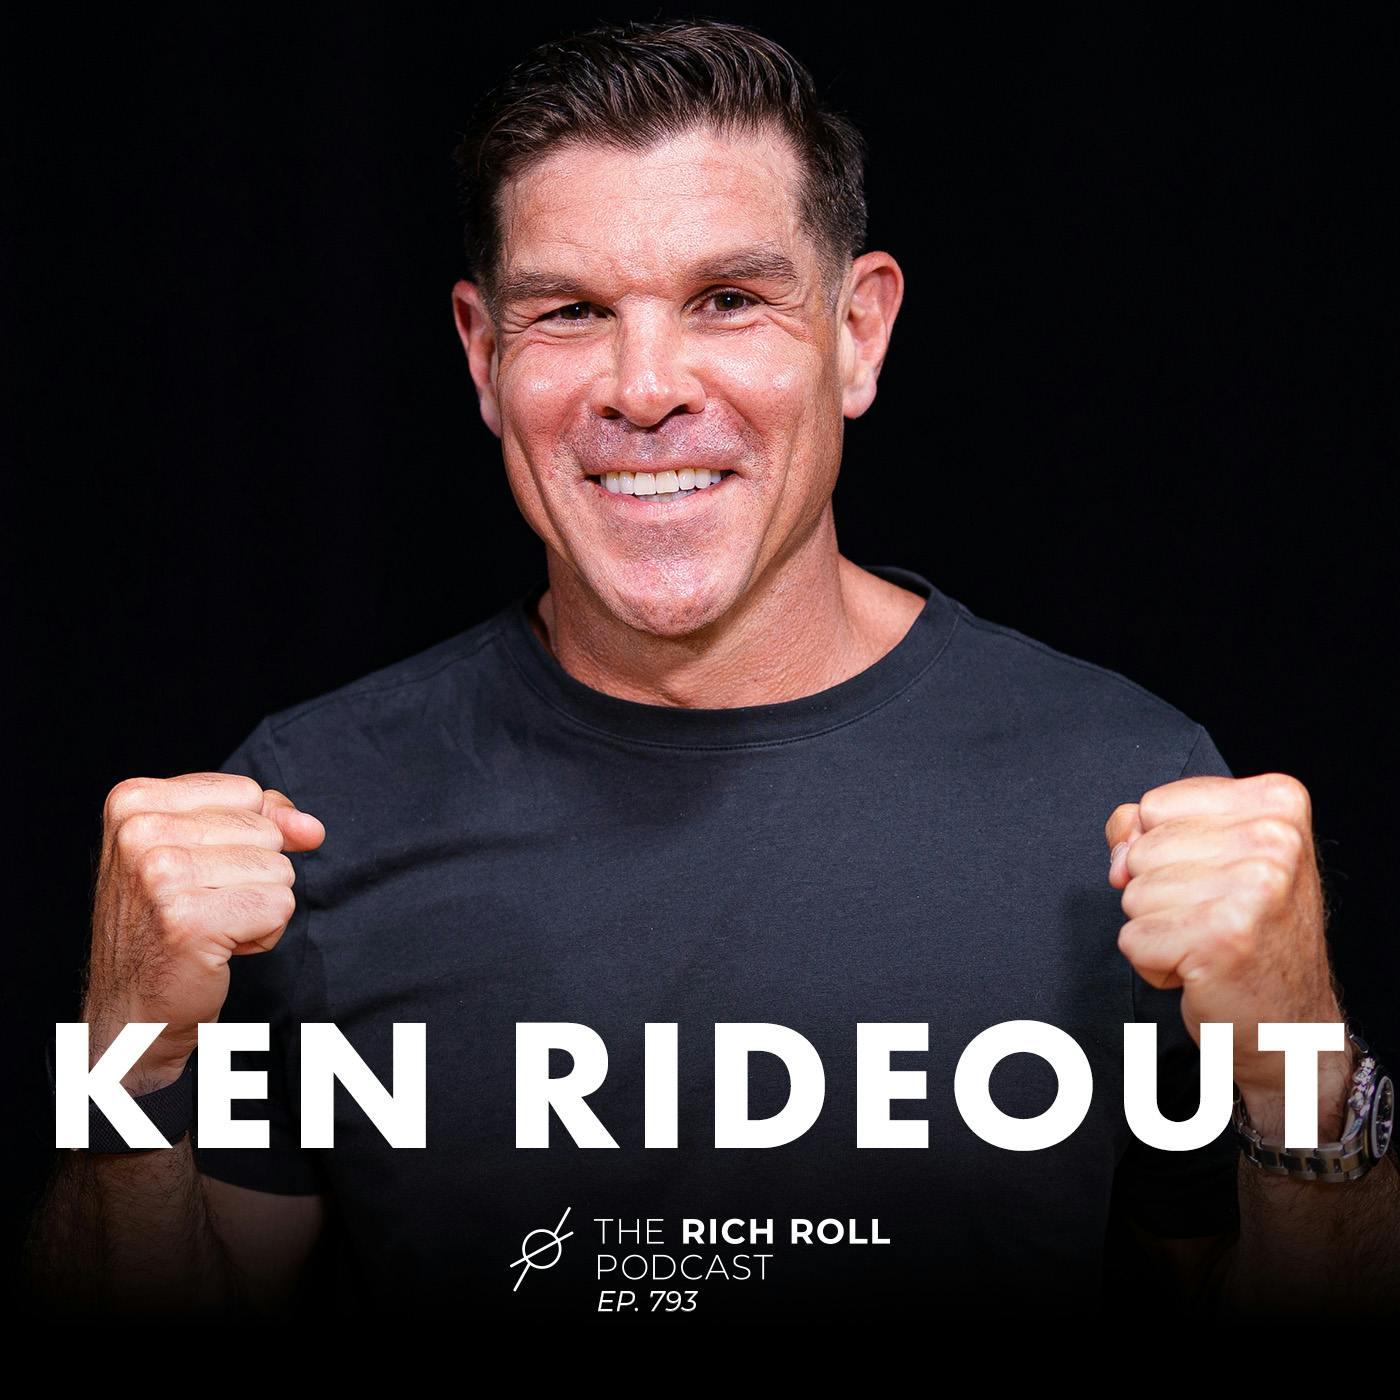 Ken Rideout’s Win-Or-Die Mindset: Controlling The Variables, Winning His First Ultra, & Why Discomfort is the Price of Admission To Greatness